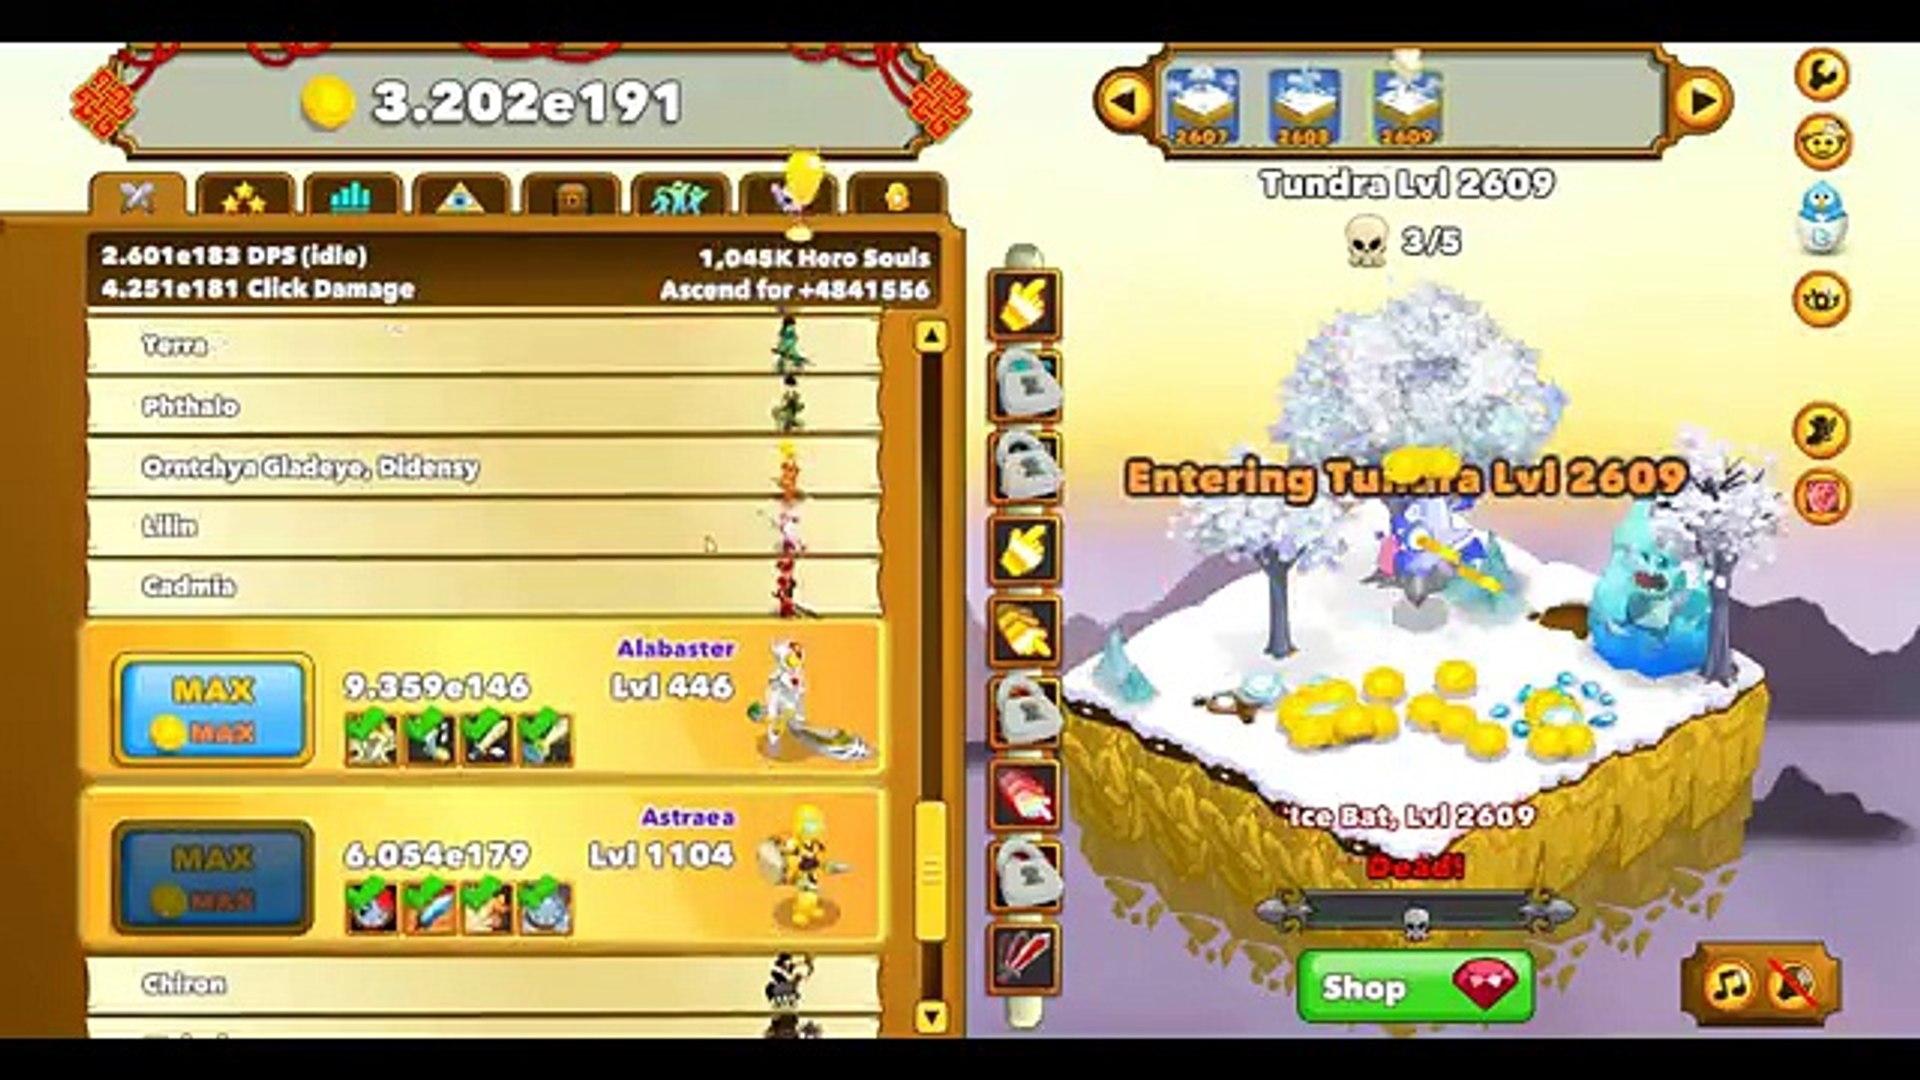 Clicker Heroes Codes. Clicker Heroes Codes: - Add gold to…